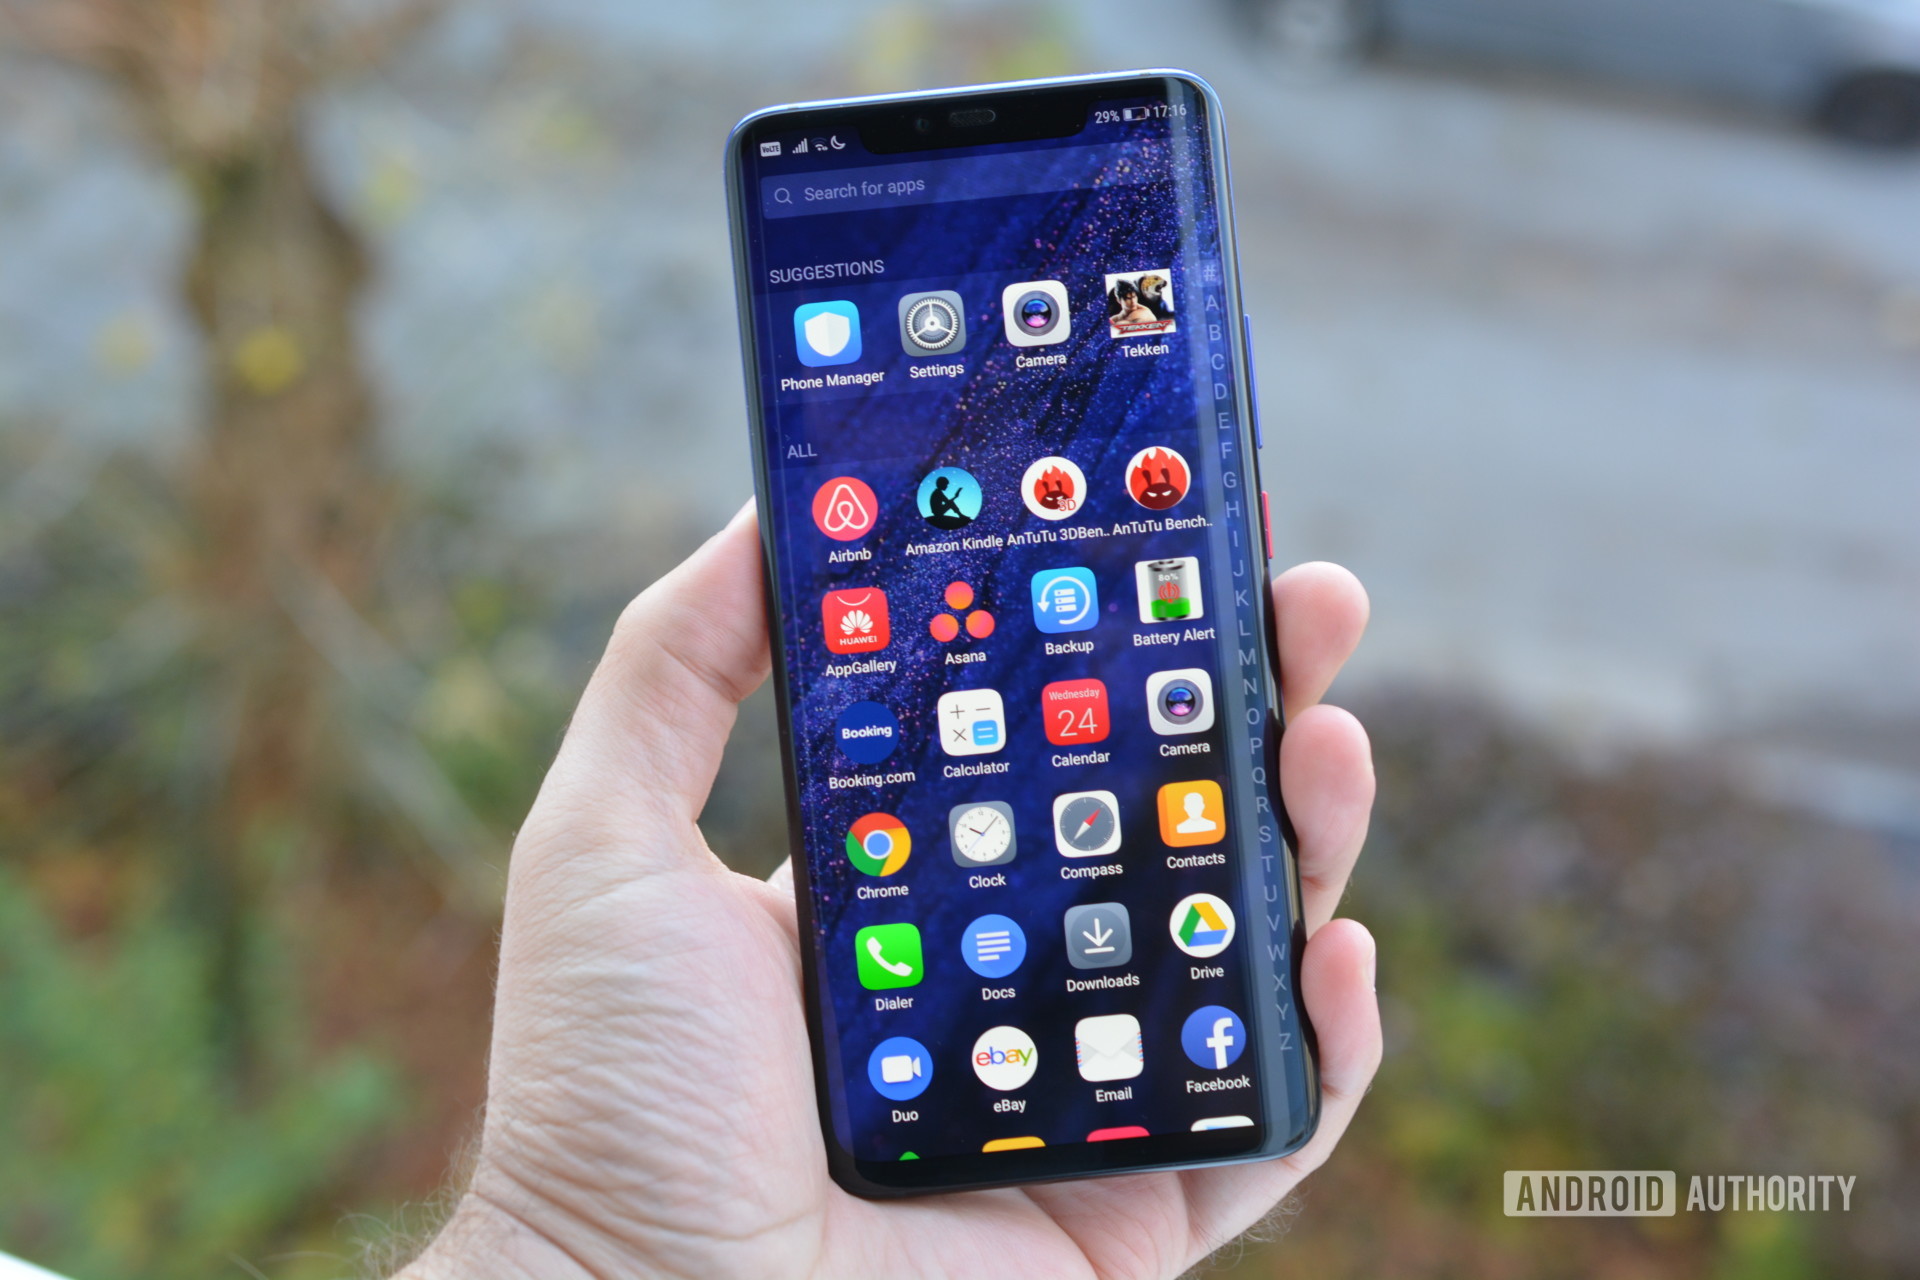 HUAWEI Mate 20 Pro handset showing the app drawer in a person's hand.